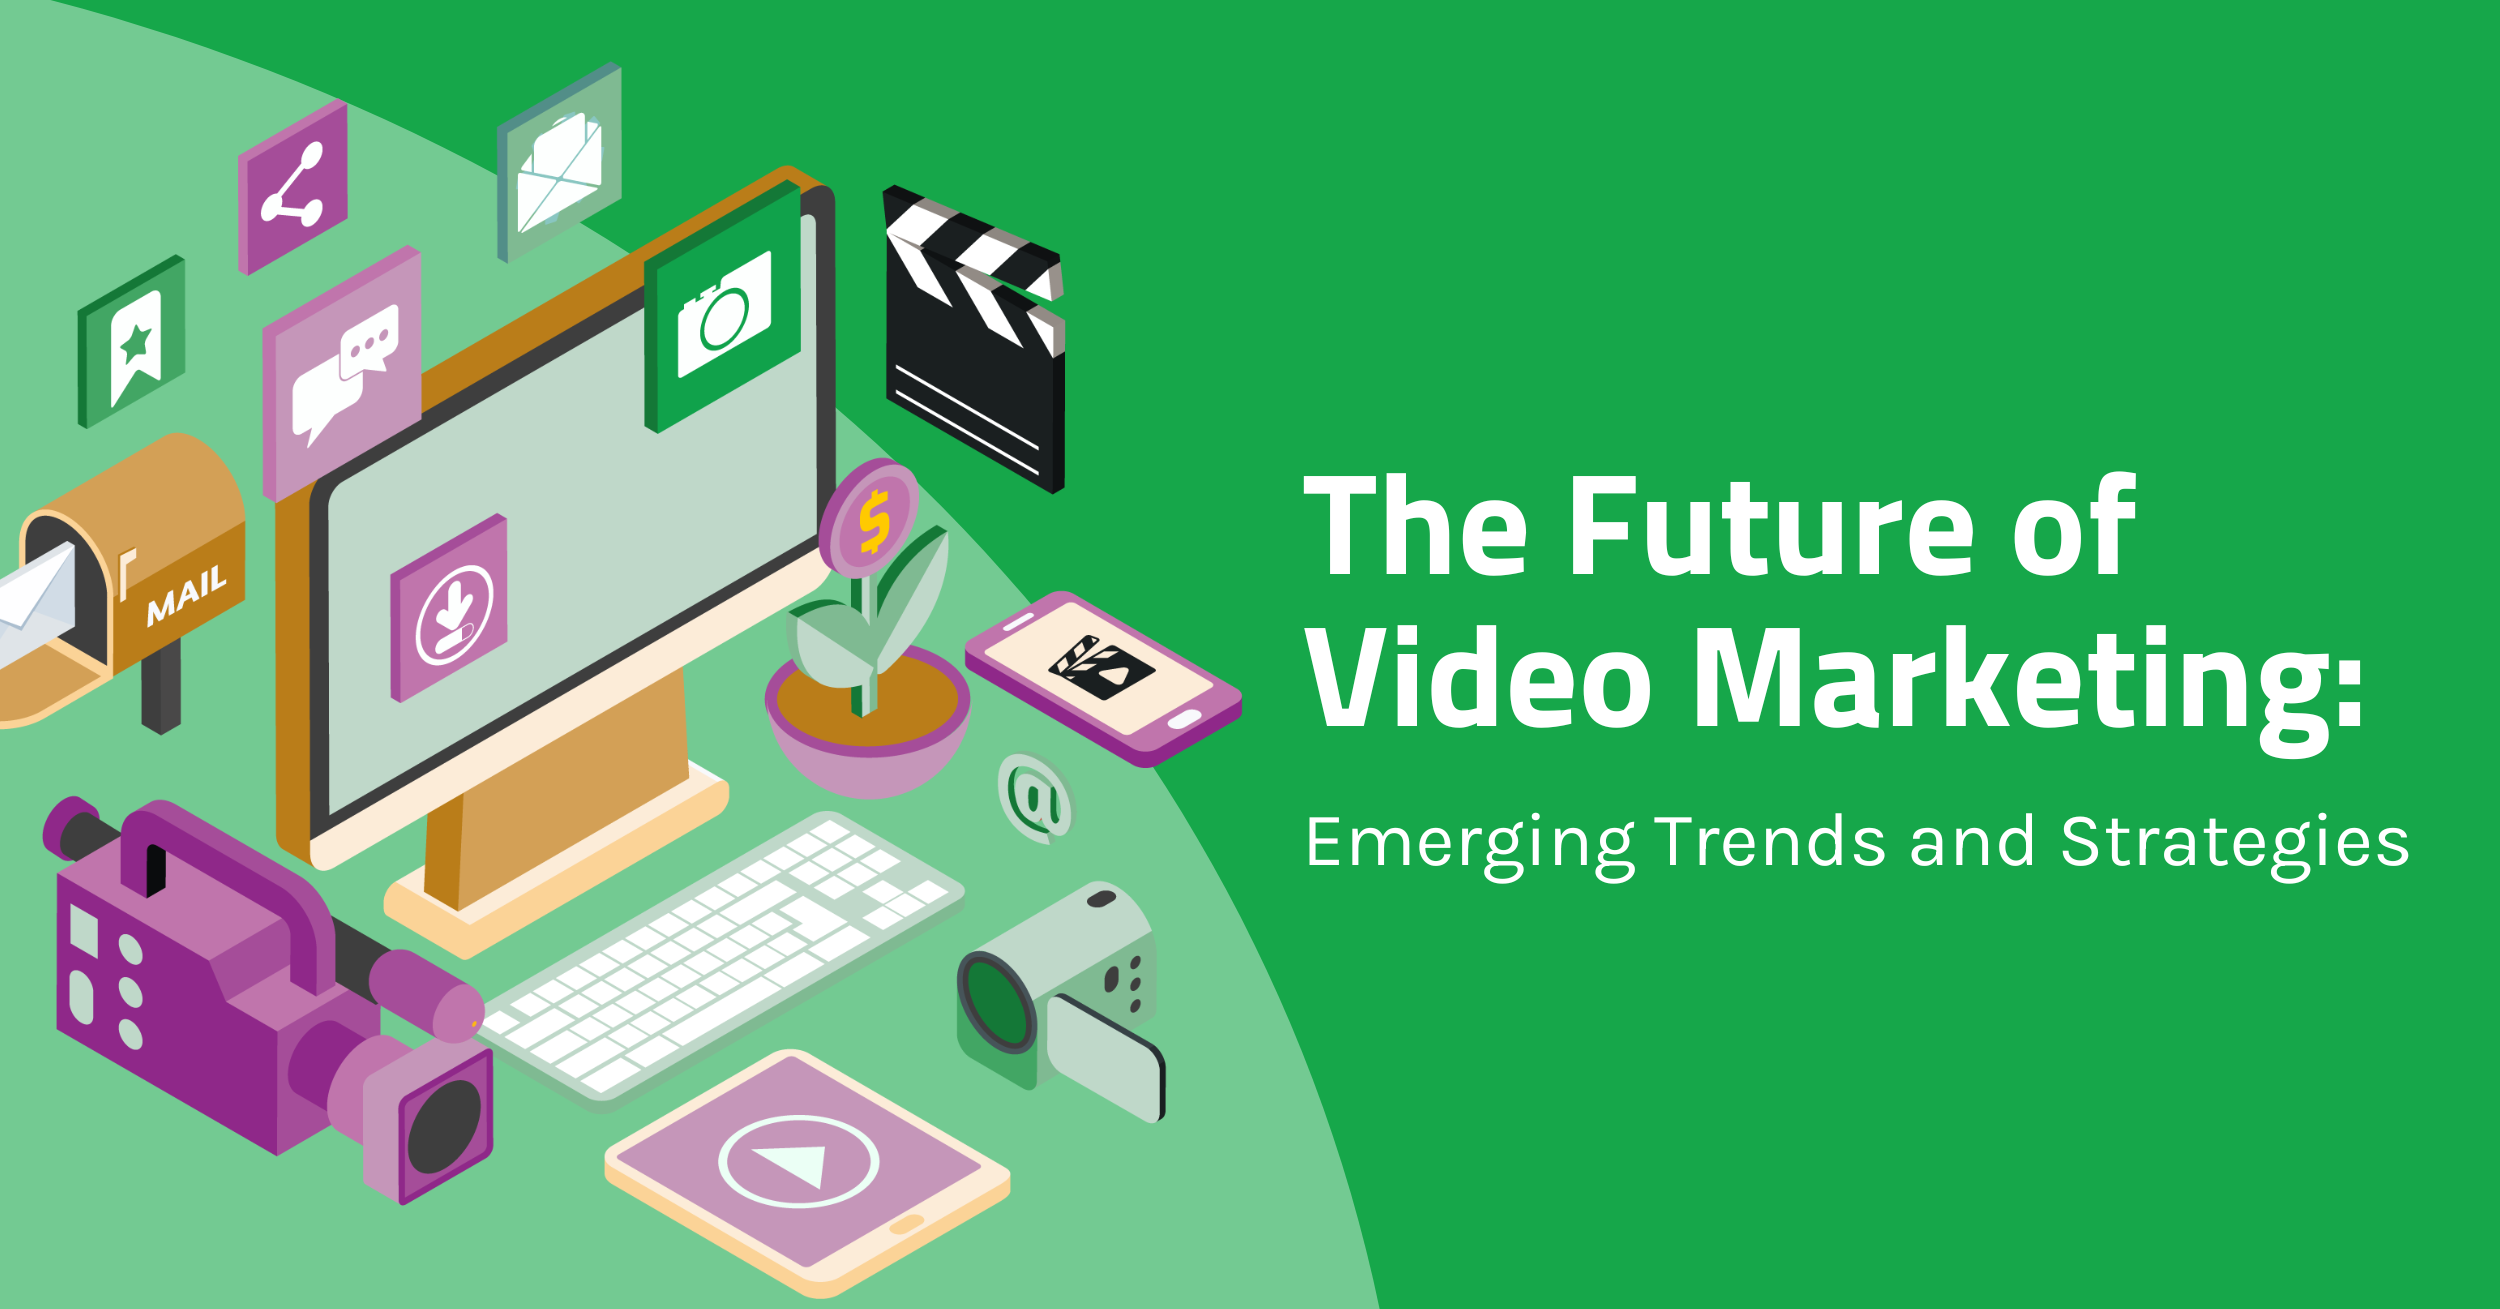 The Future of Video Marketing Emerging Trends and Strategies